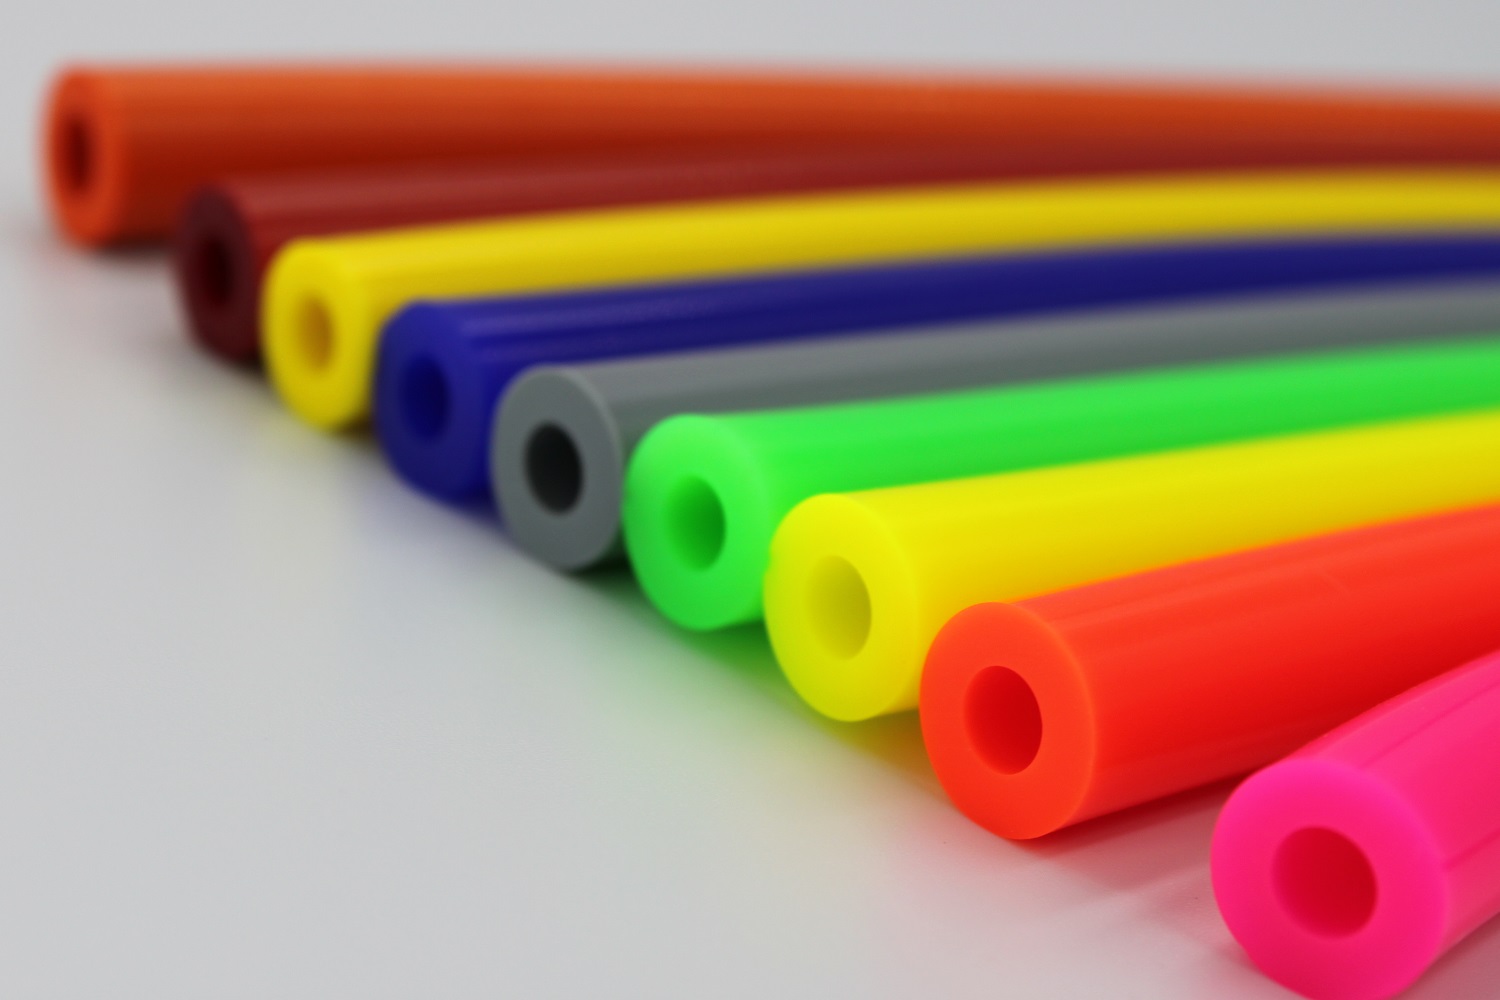 More info on Coloured Silicone Vacuum Tubing